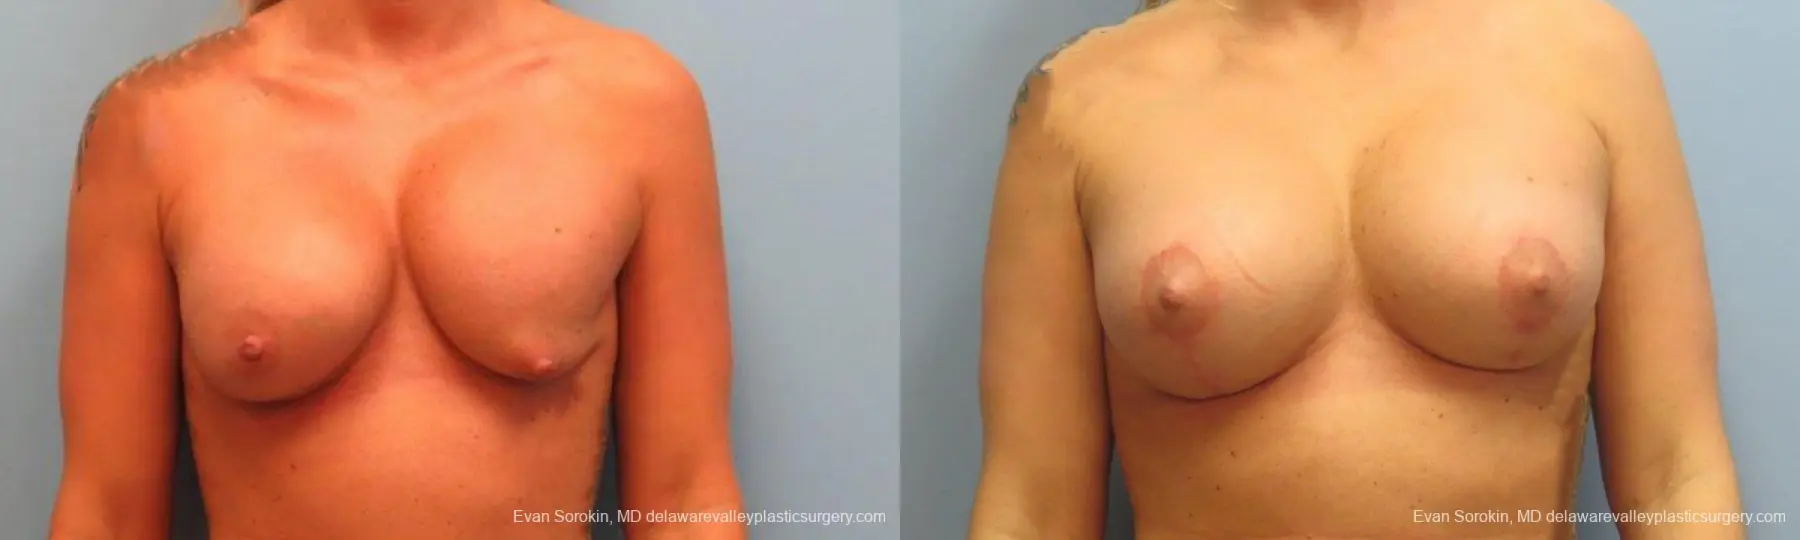 Philadelphia Breast Augmentation 9369 - Before and After 1